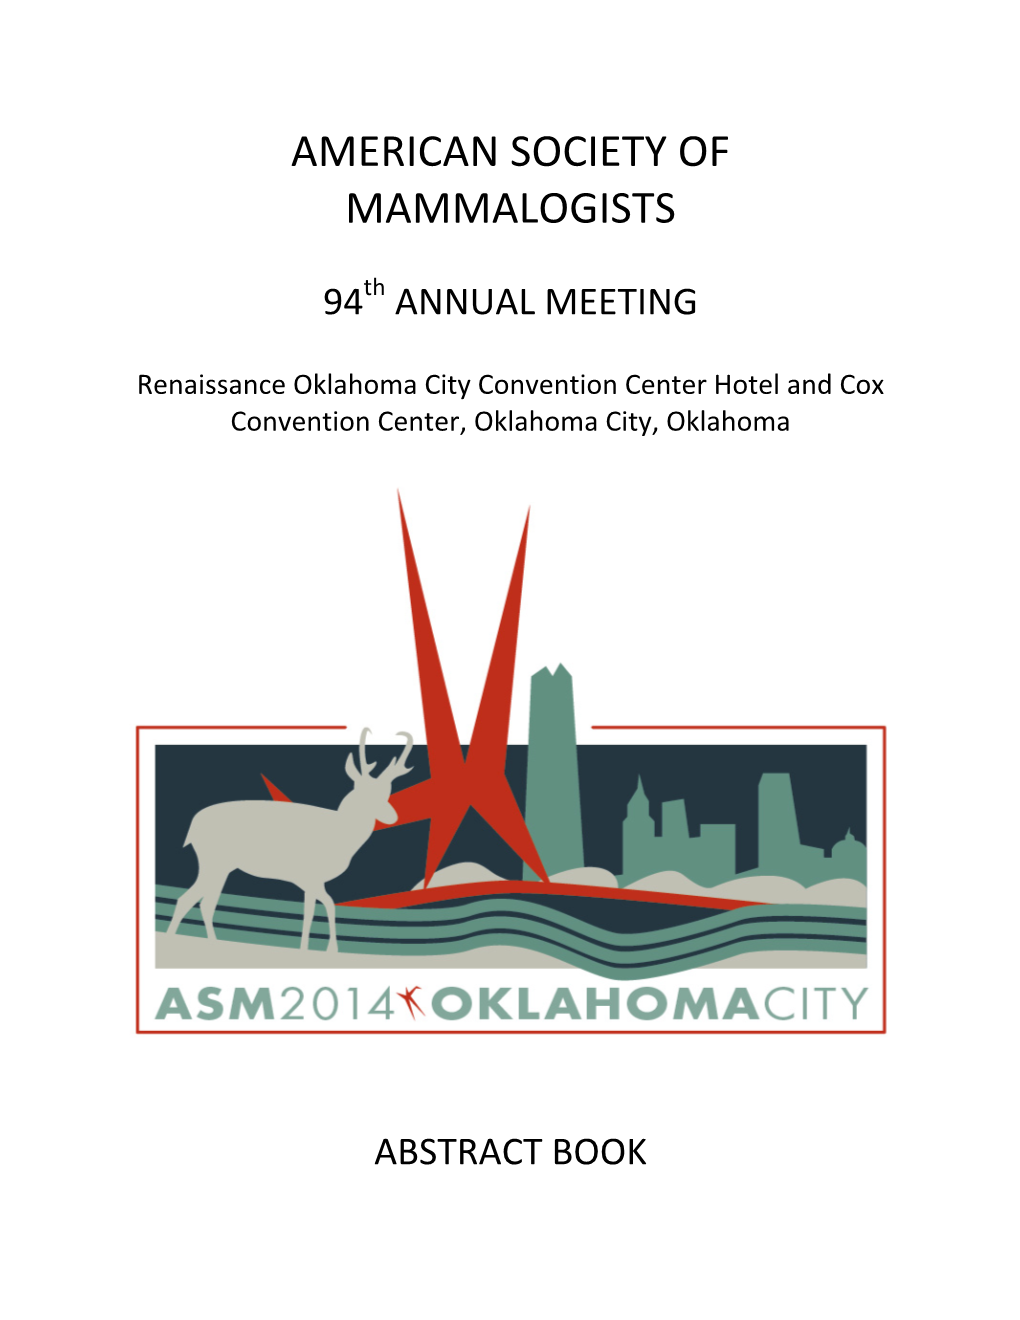 American Society of Mammalogists